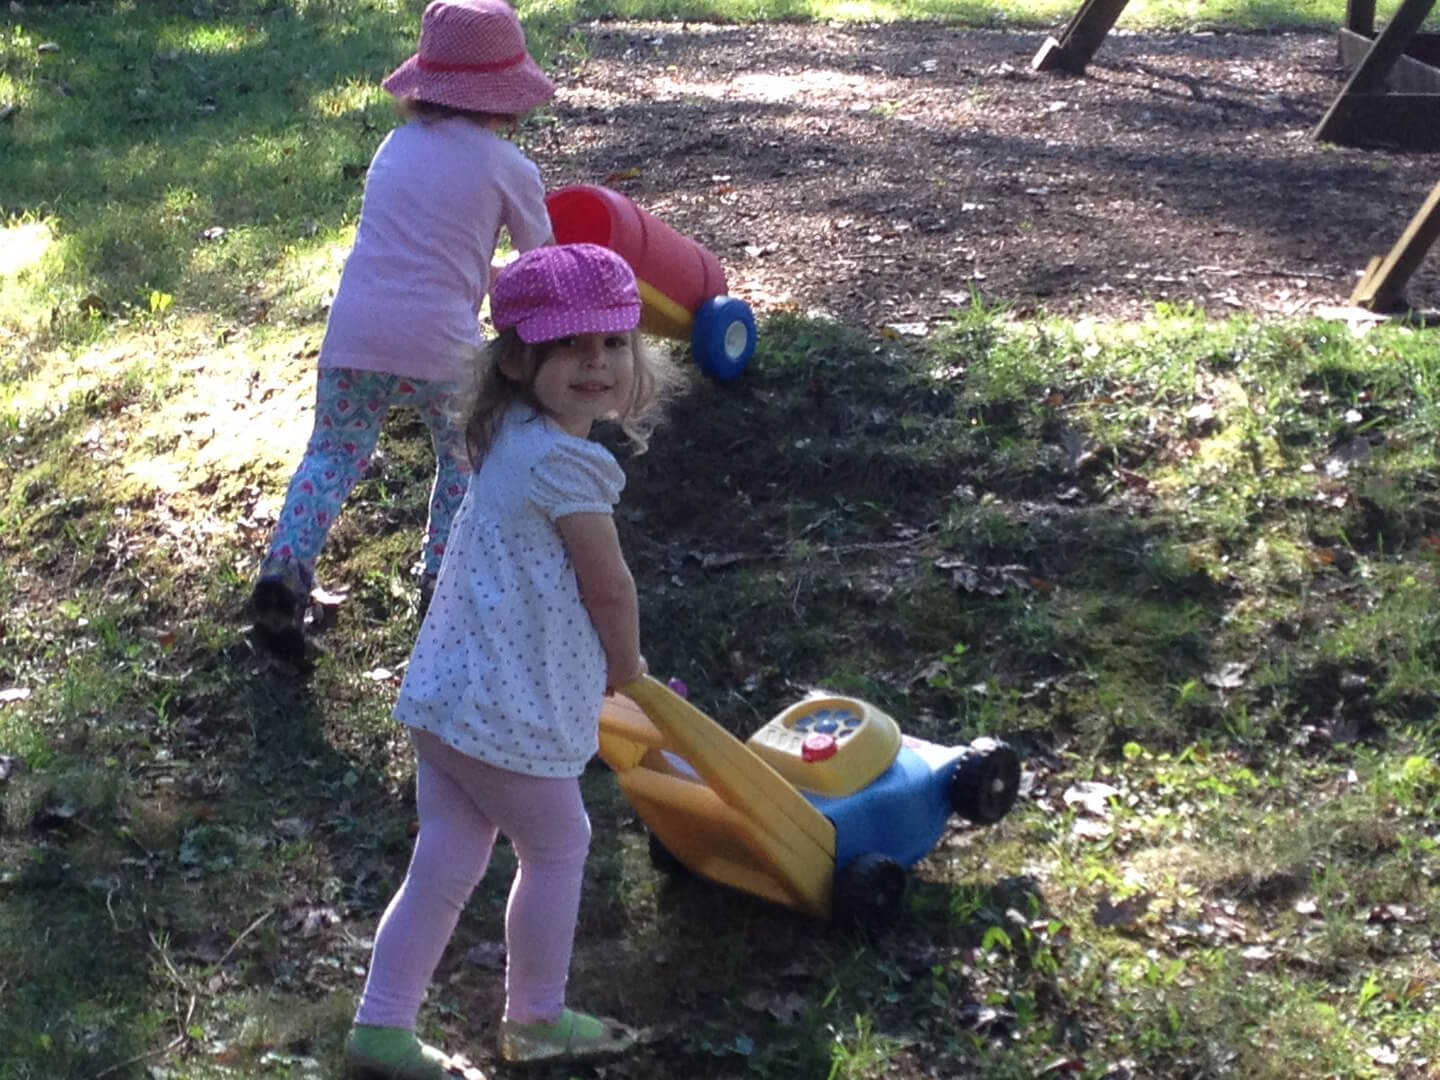 Two young girls playing with toy gardening equipment